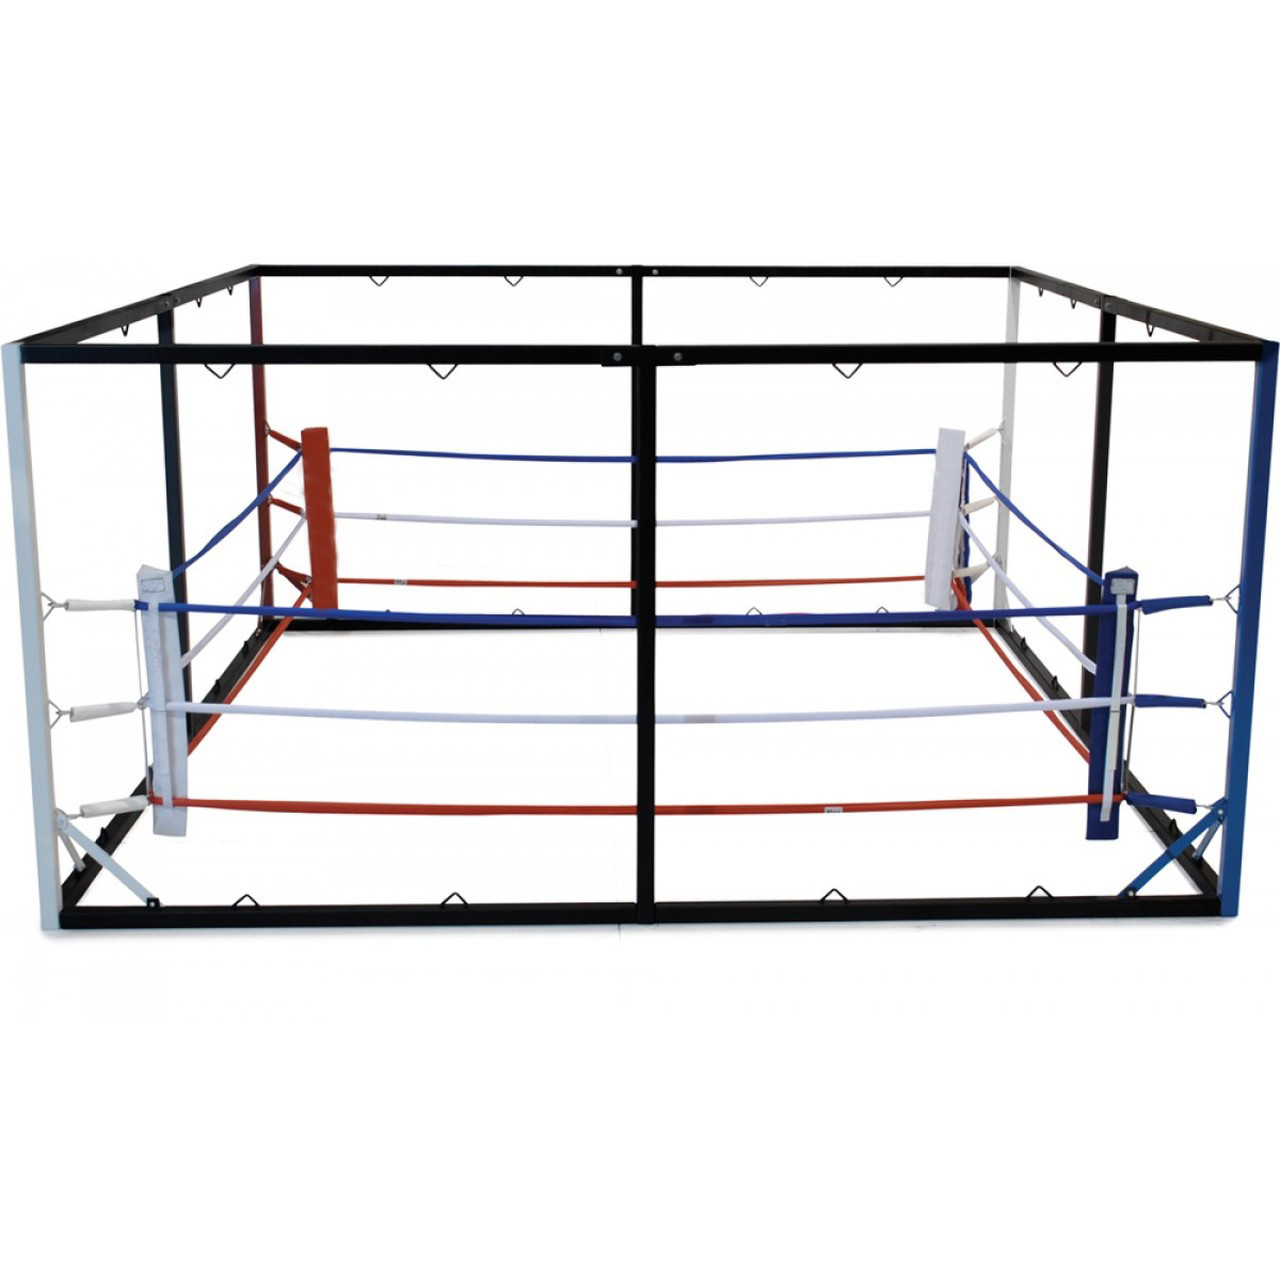 PROLAST SELF-STANDING FLOOR BOXING RING - PRO FIGHT SHOP